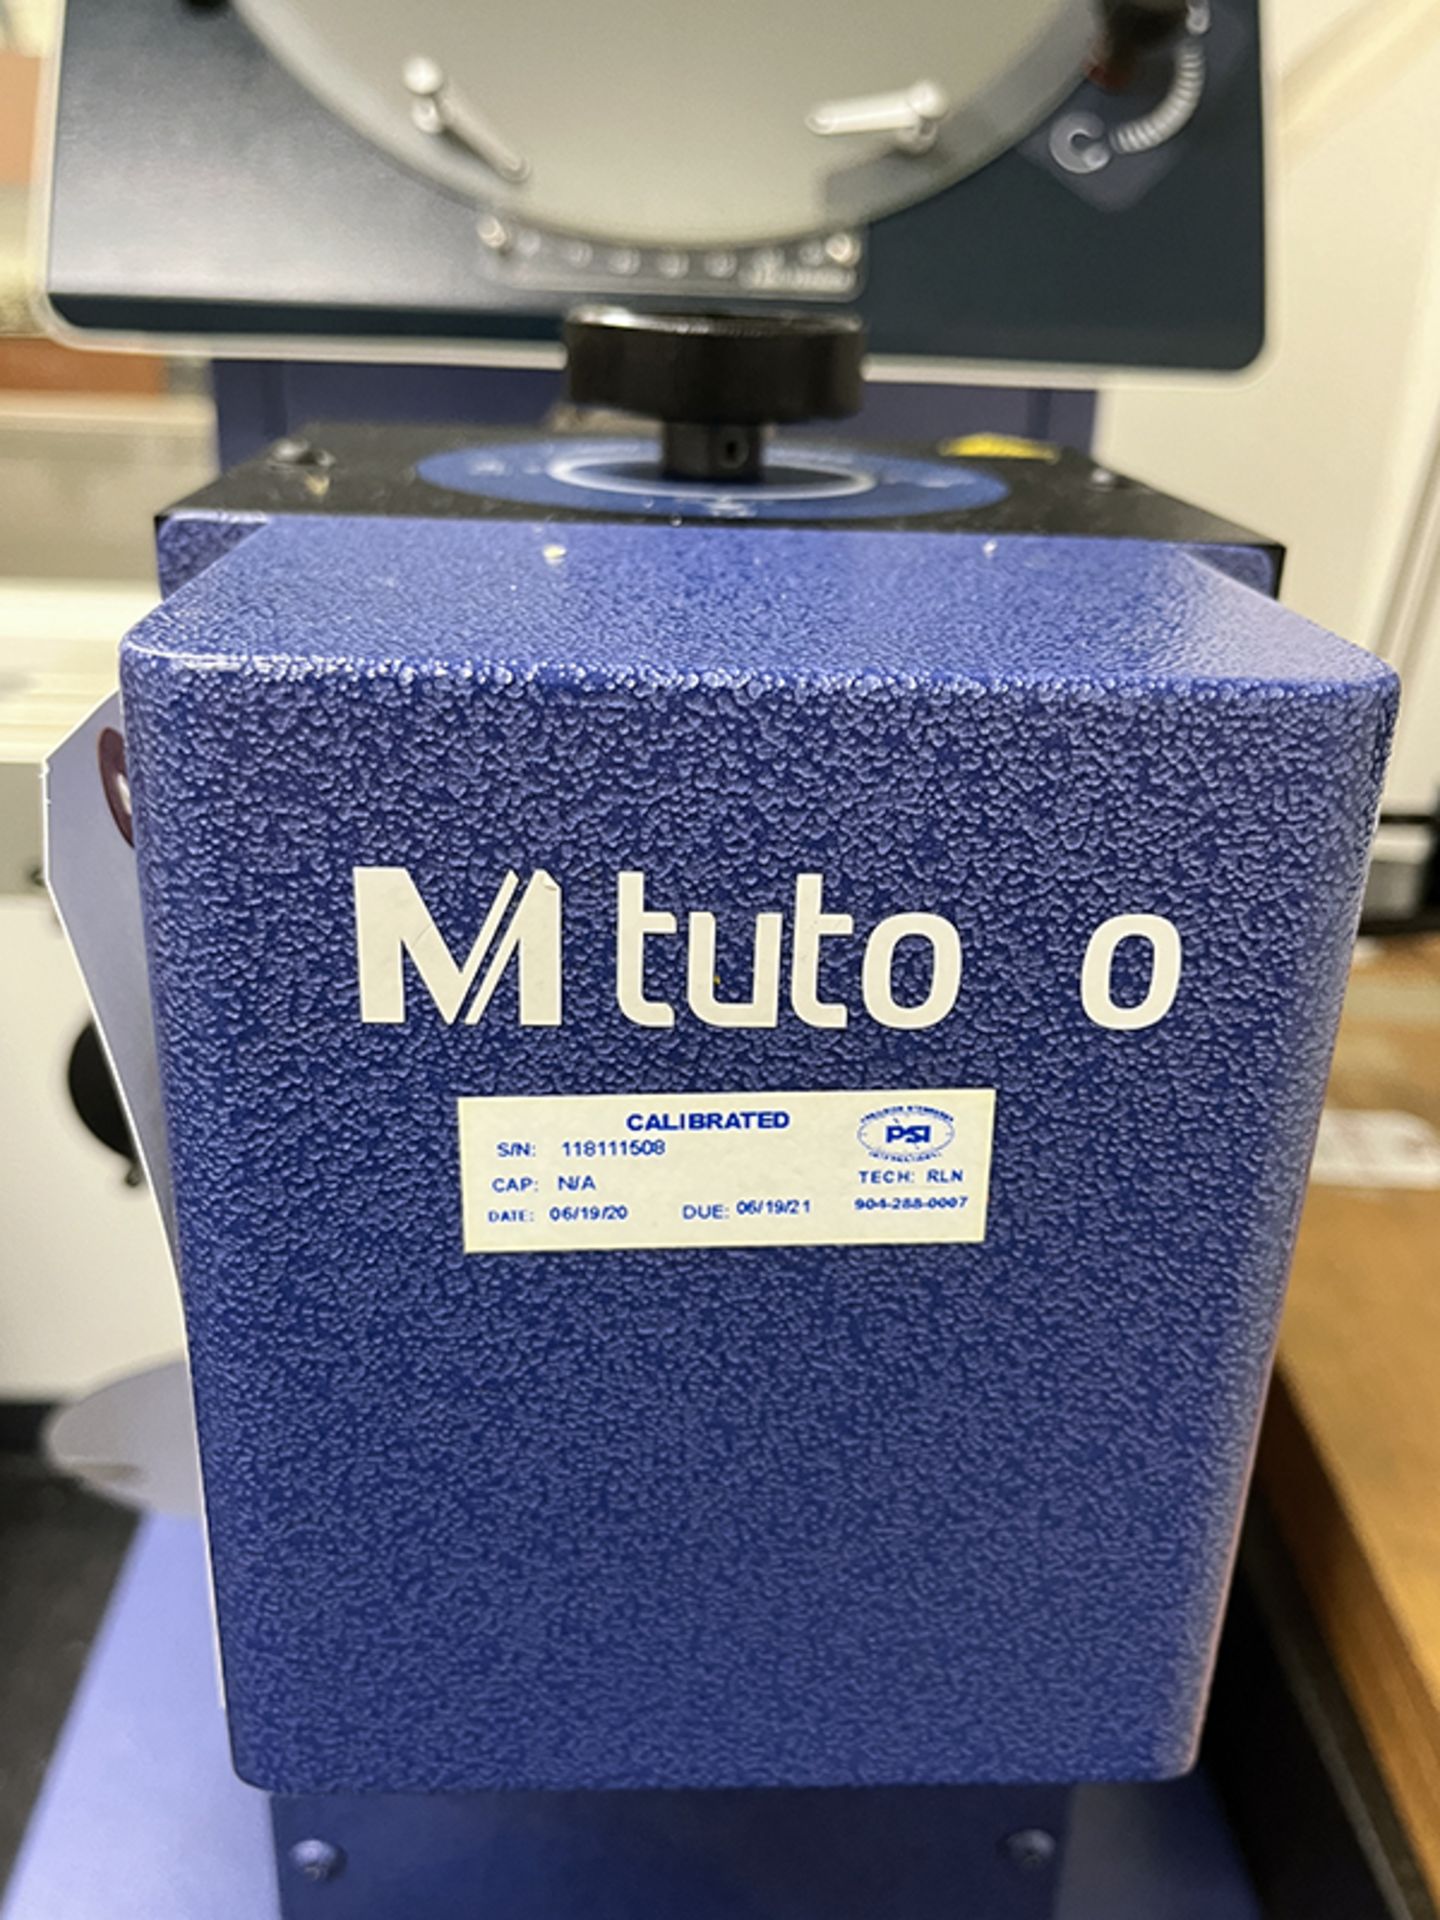 16" Mitutoyo PH-A14 Optical Comparator (2015) - Image 9 of 10